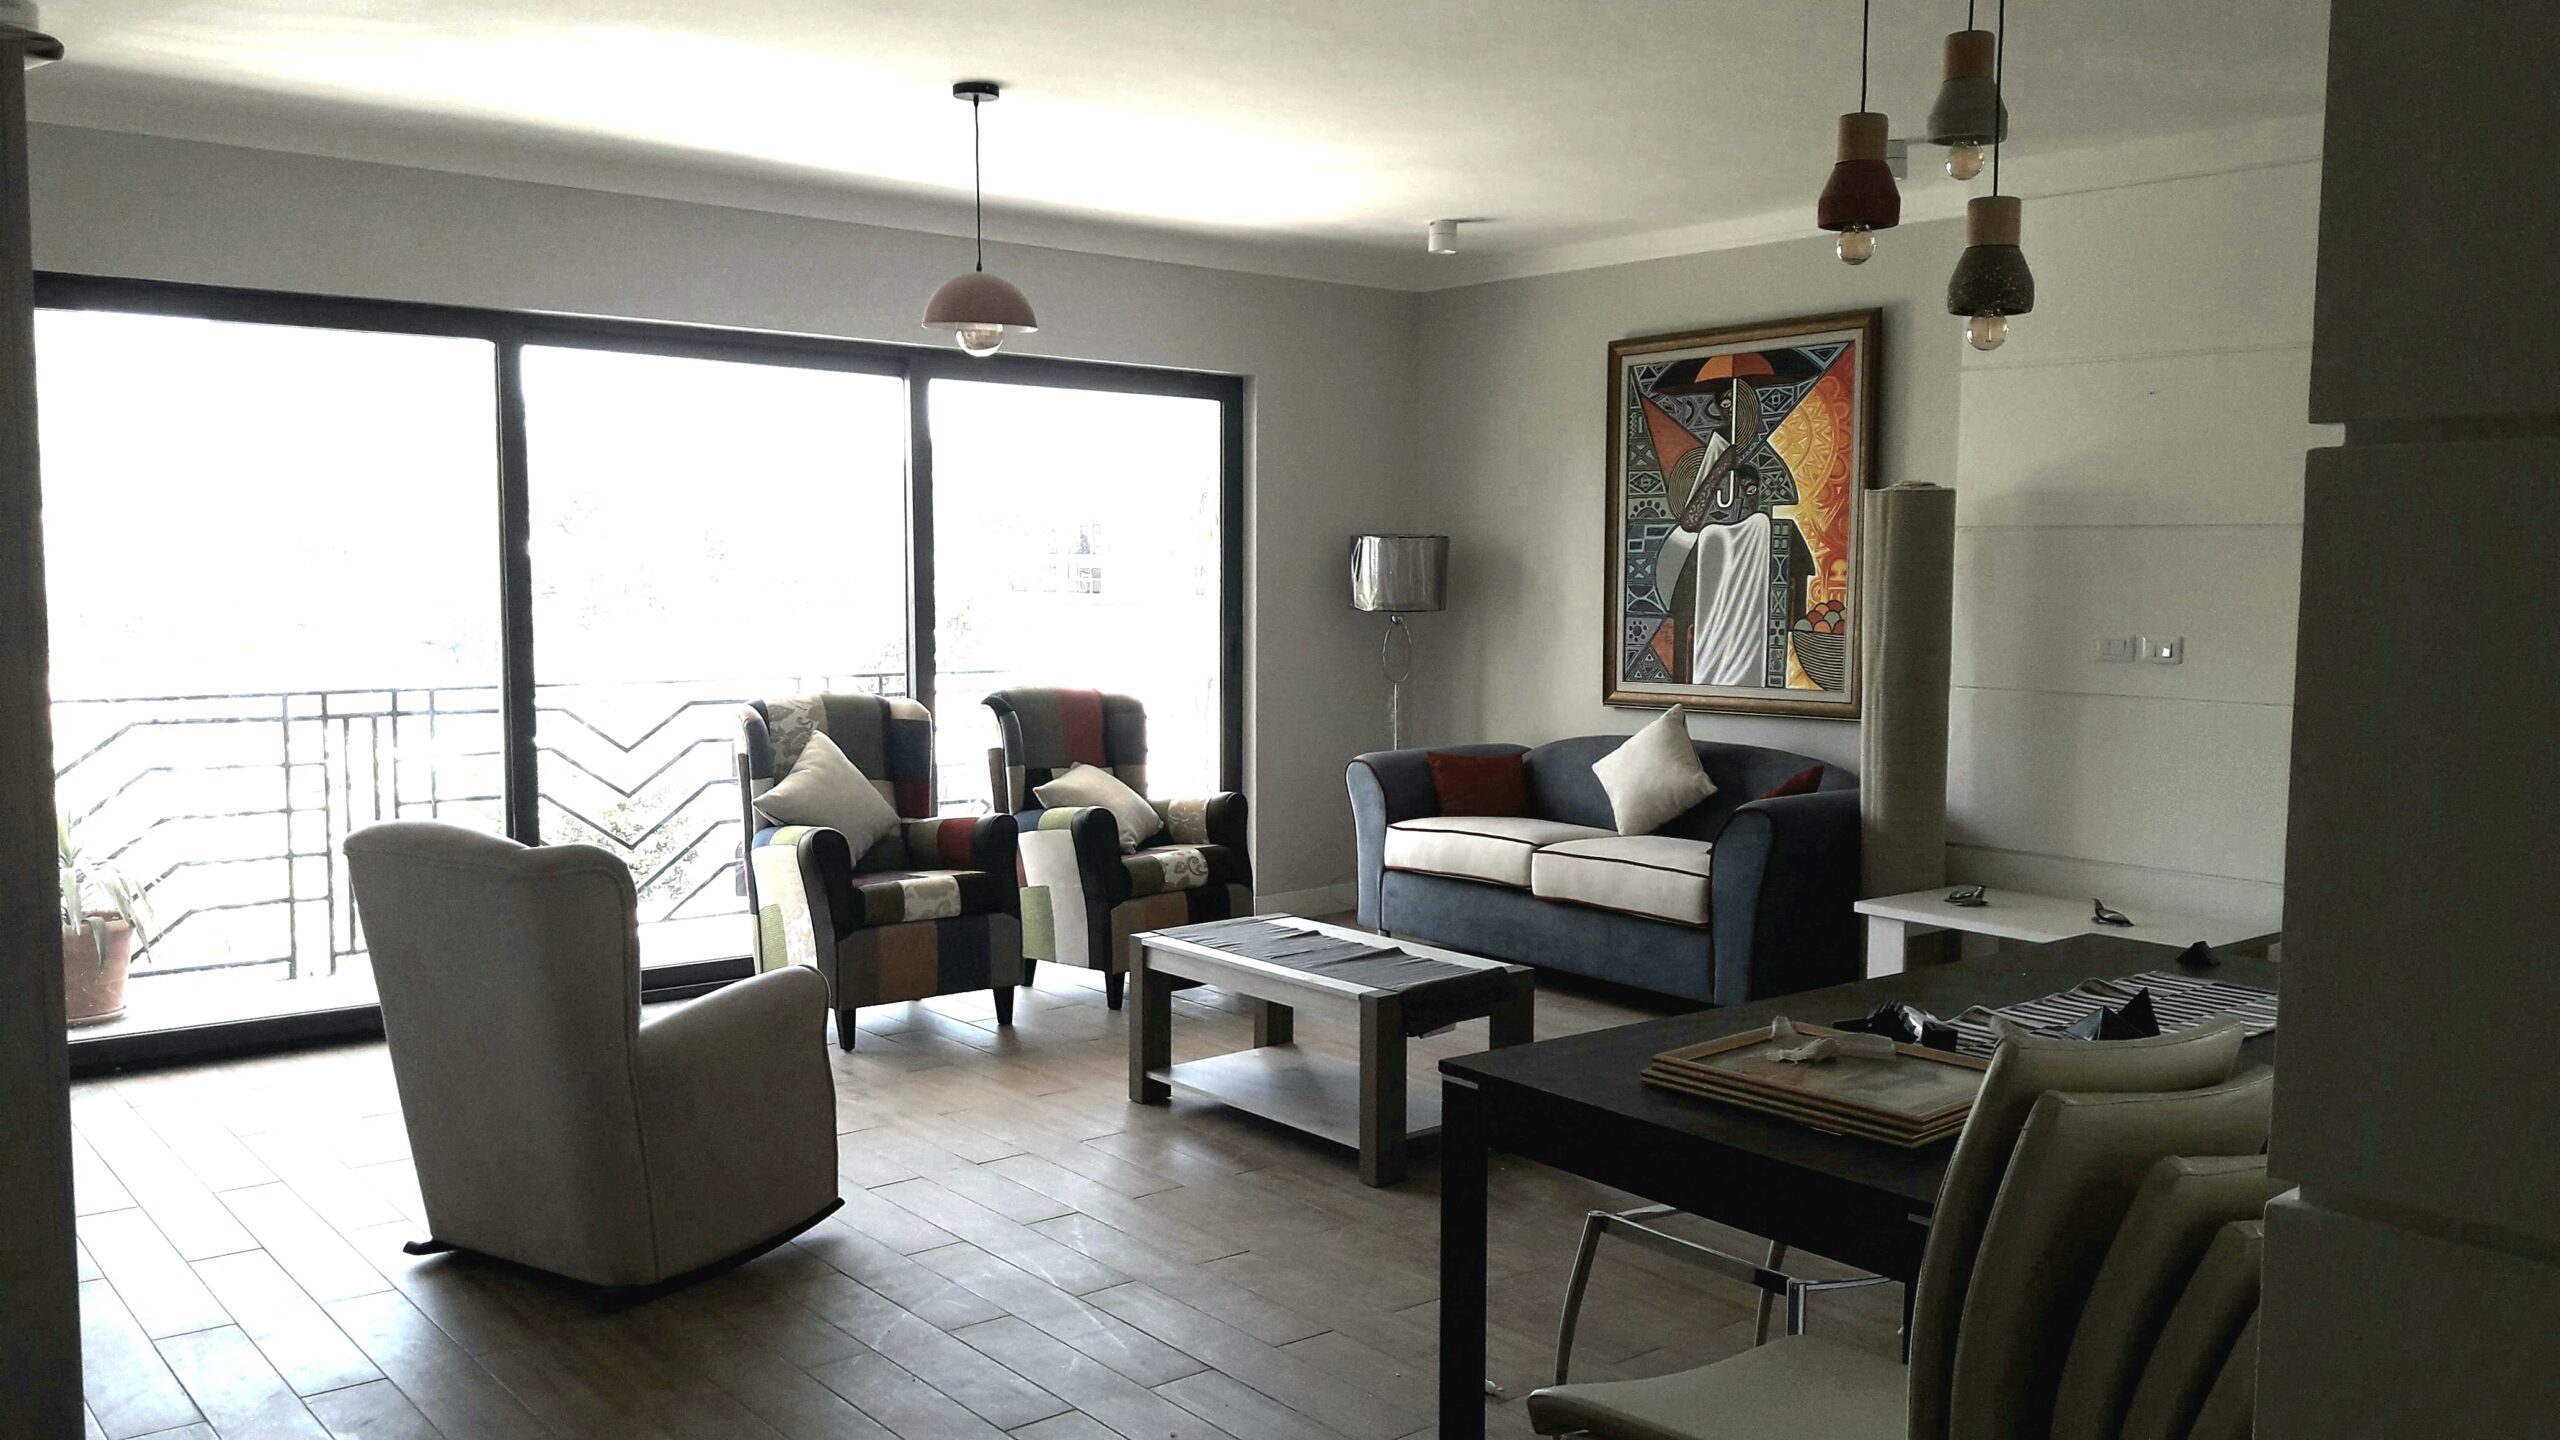 3 Bedroom Luxury Apartment For Rent in Addis Ababa, Bole